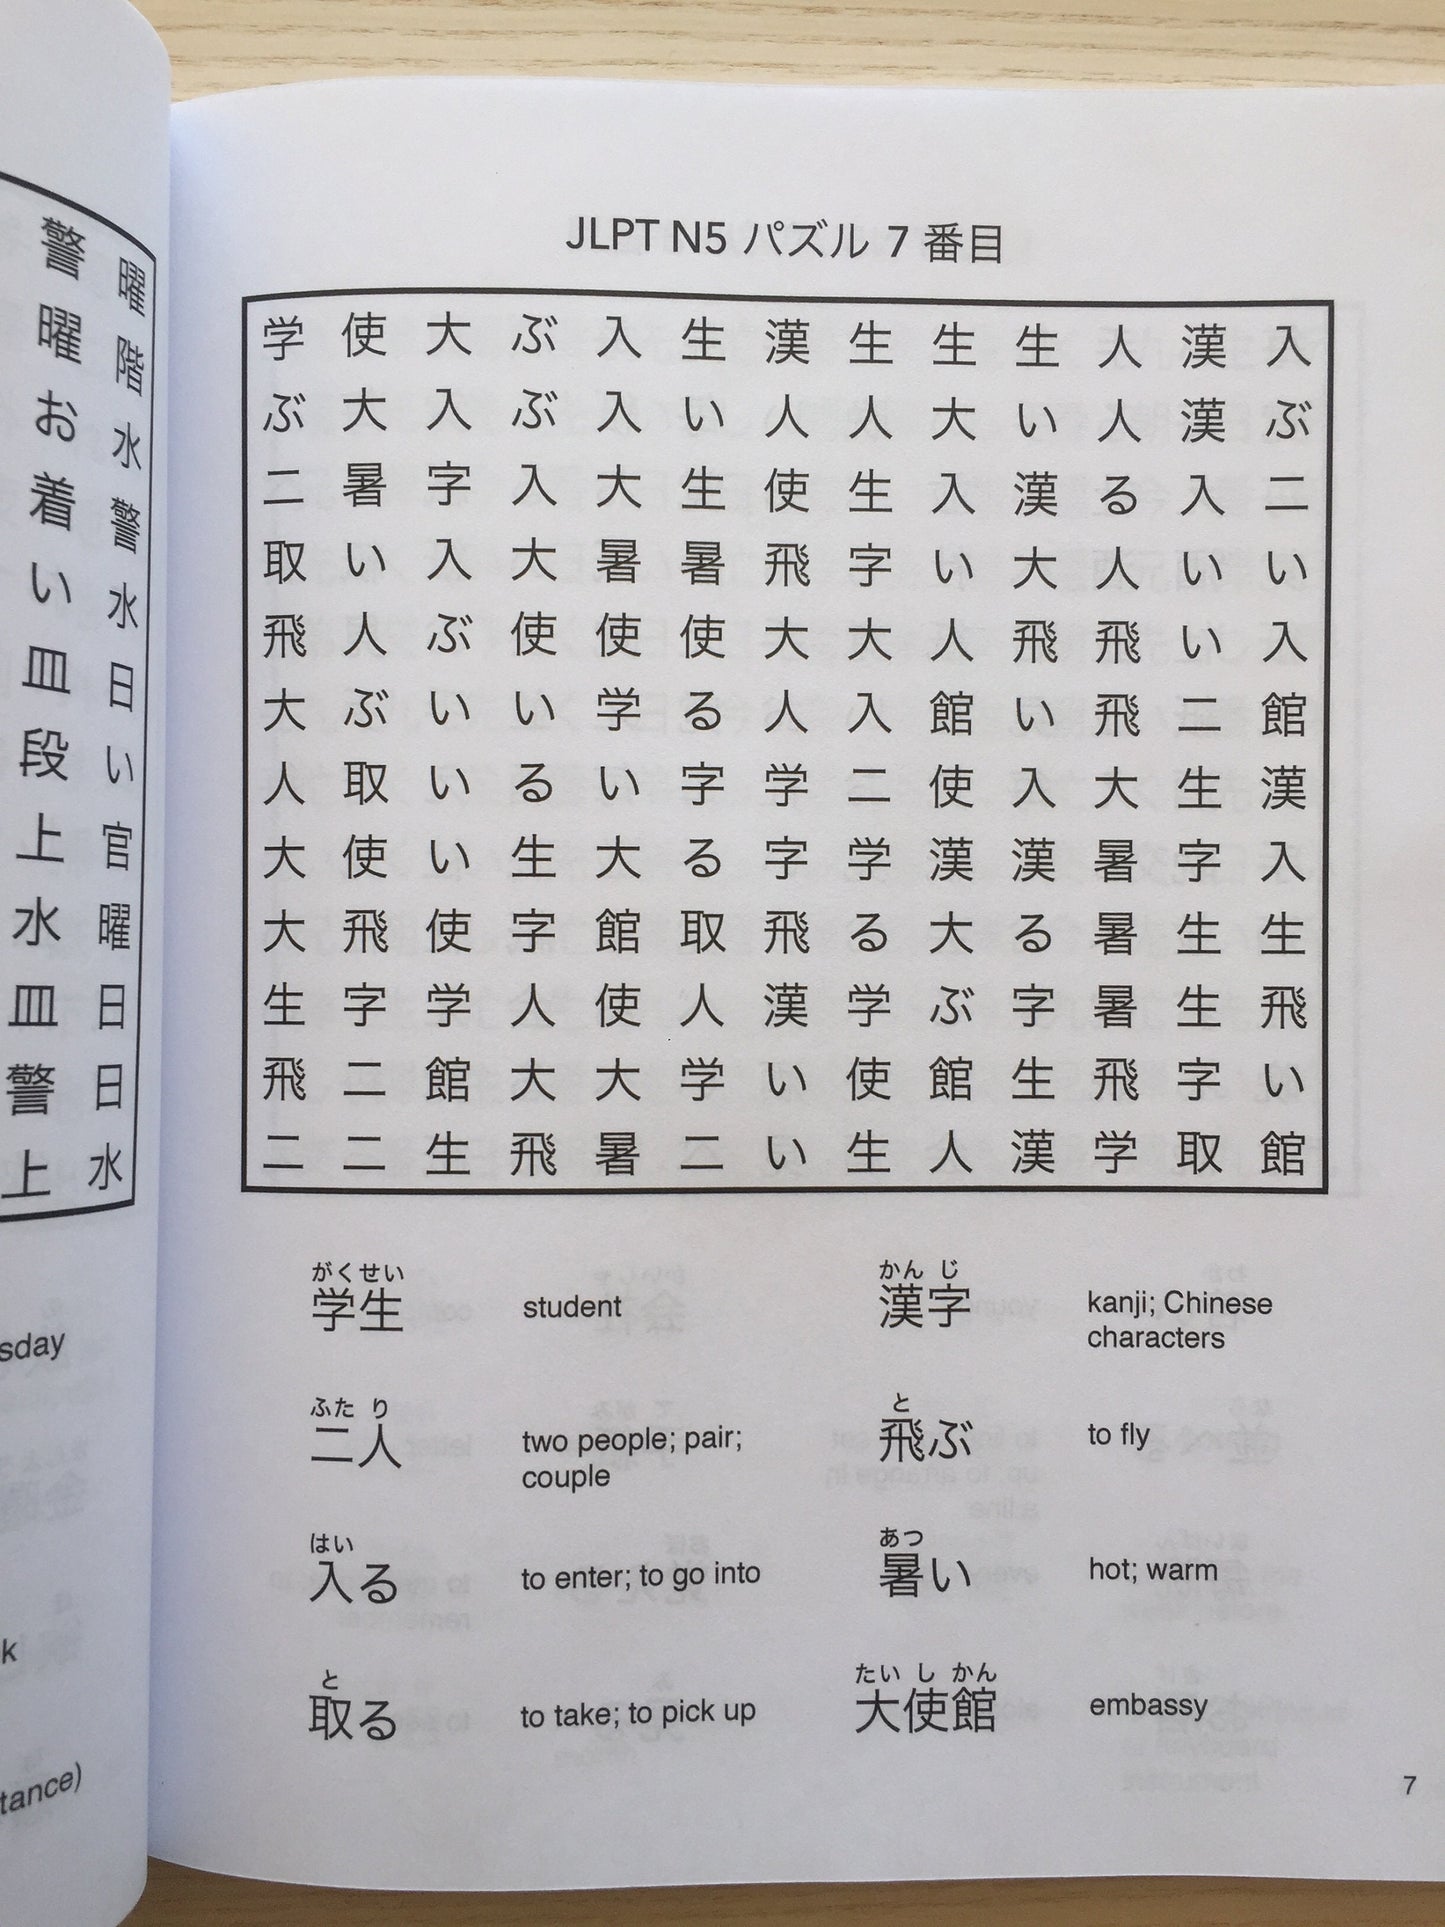 JLPT N1 Japanese Vocabulary Word Search: Kanji Reading Puzzles to Master the Japanese-Language Proficiency Test